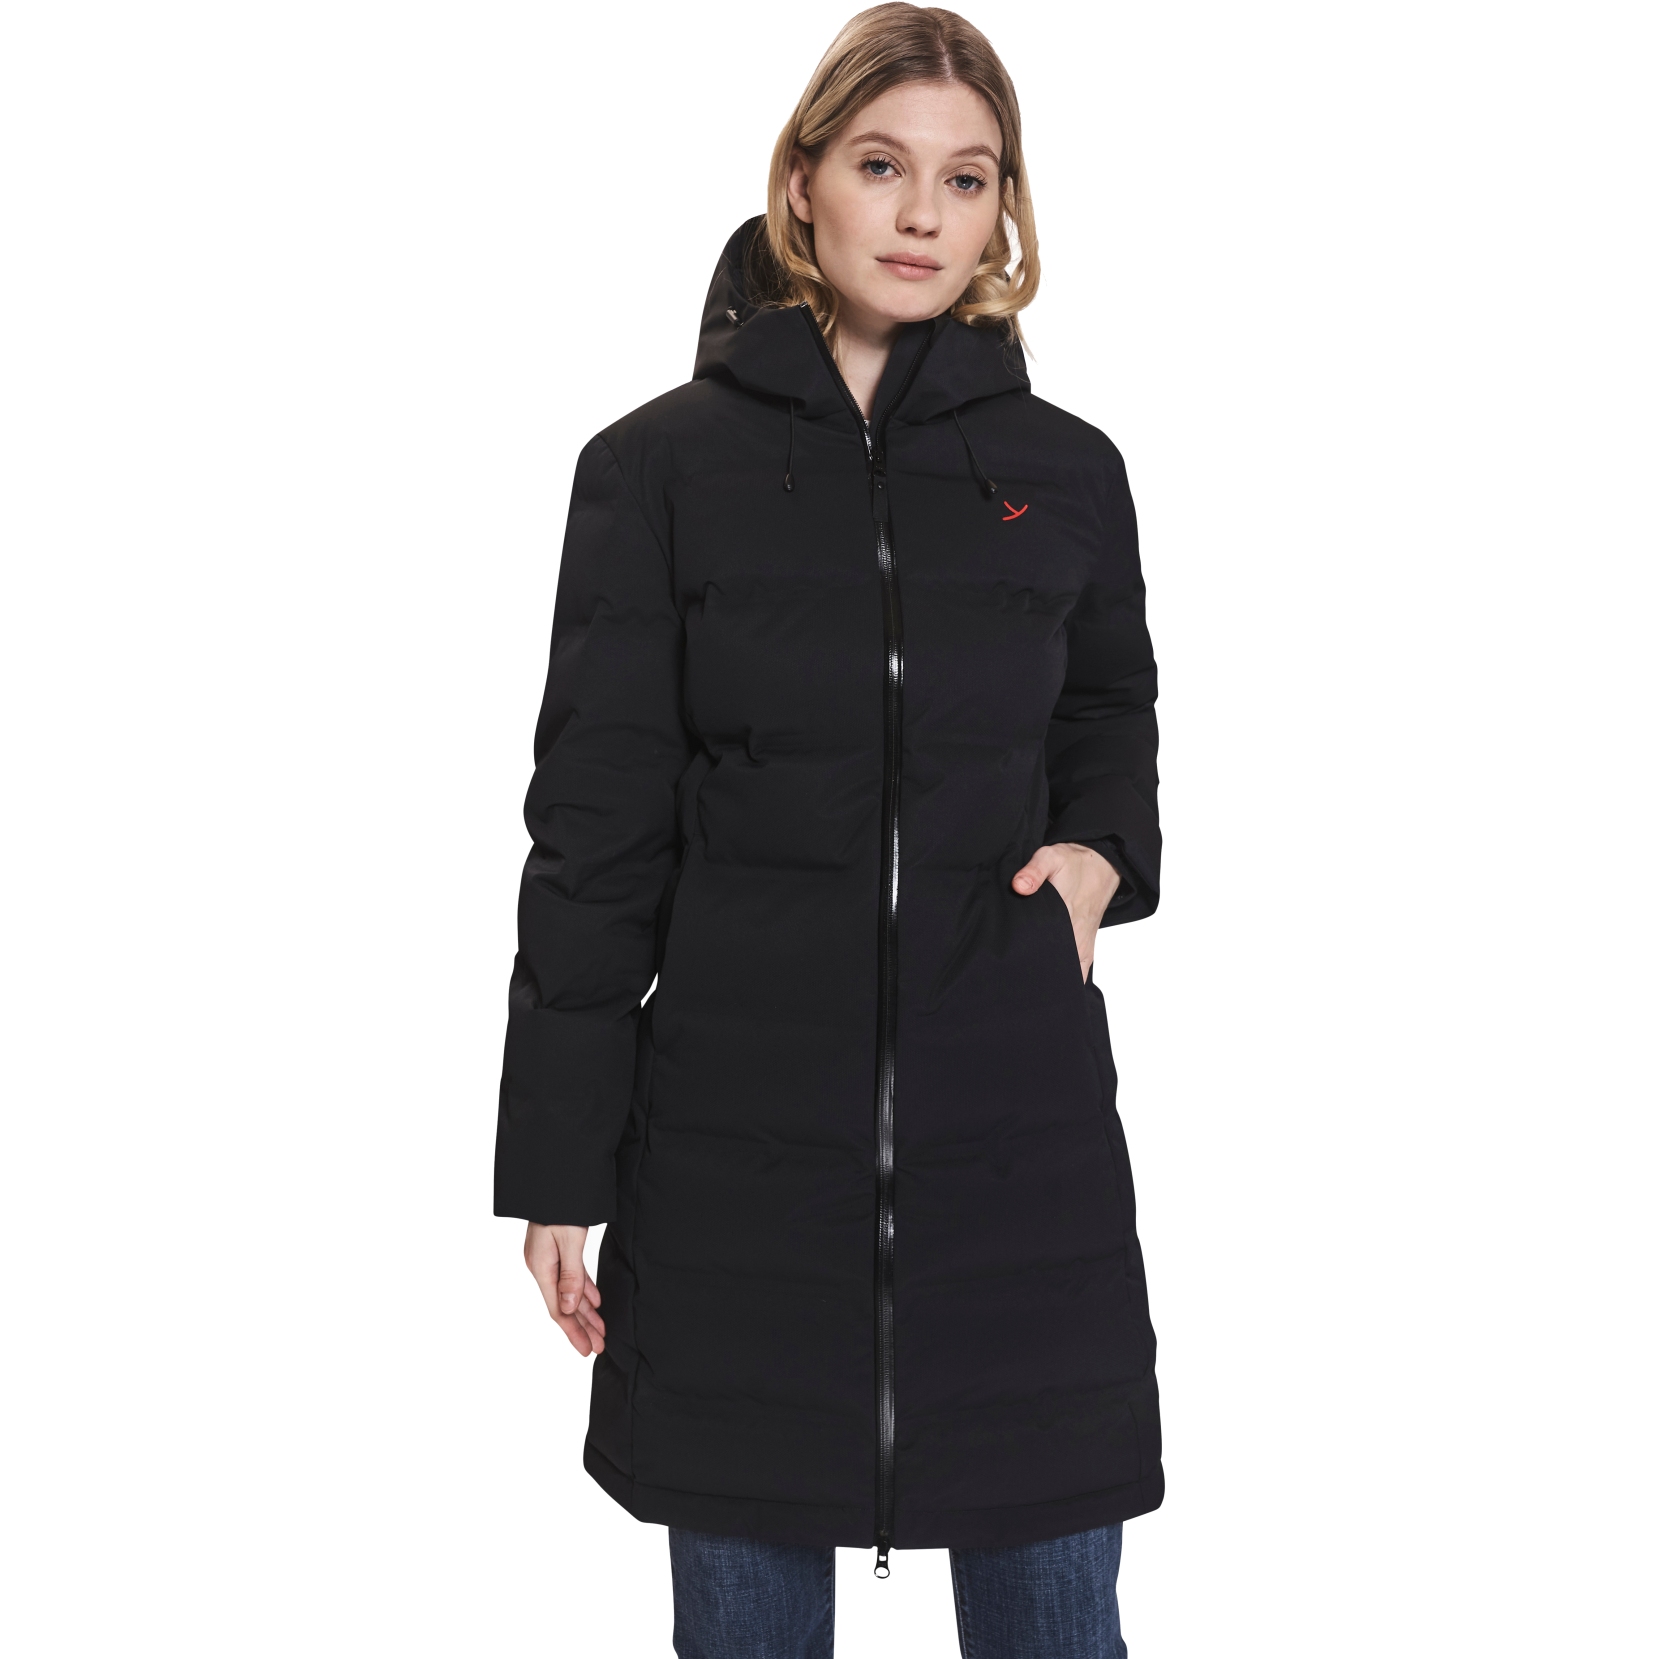 Picture of Y by Nordisk Moana Down Coat Women - black